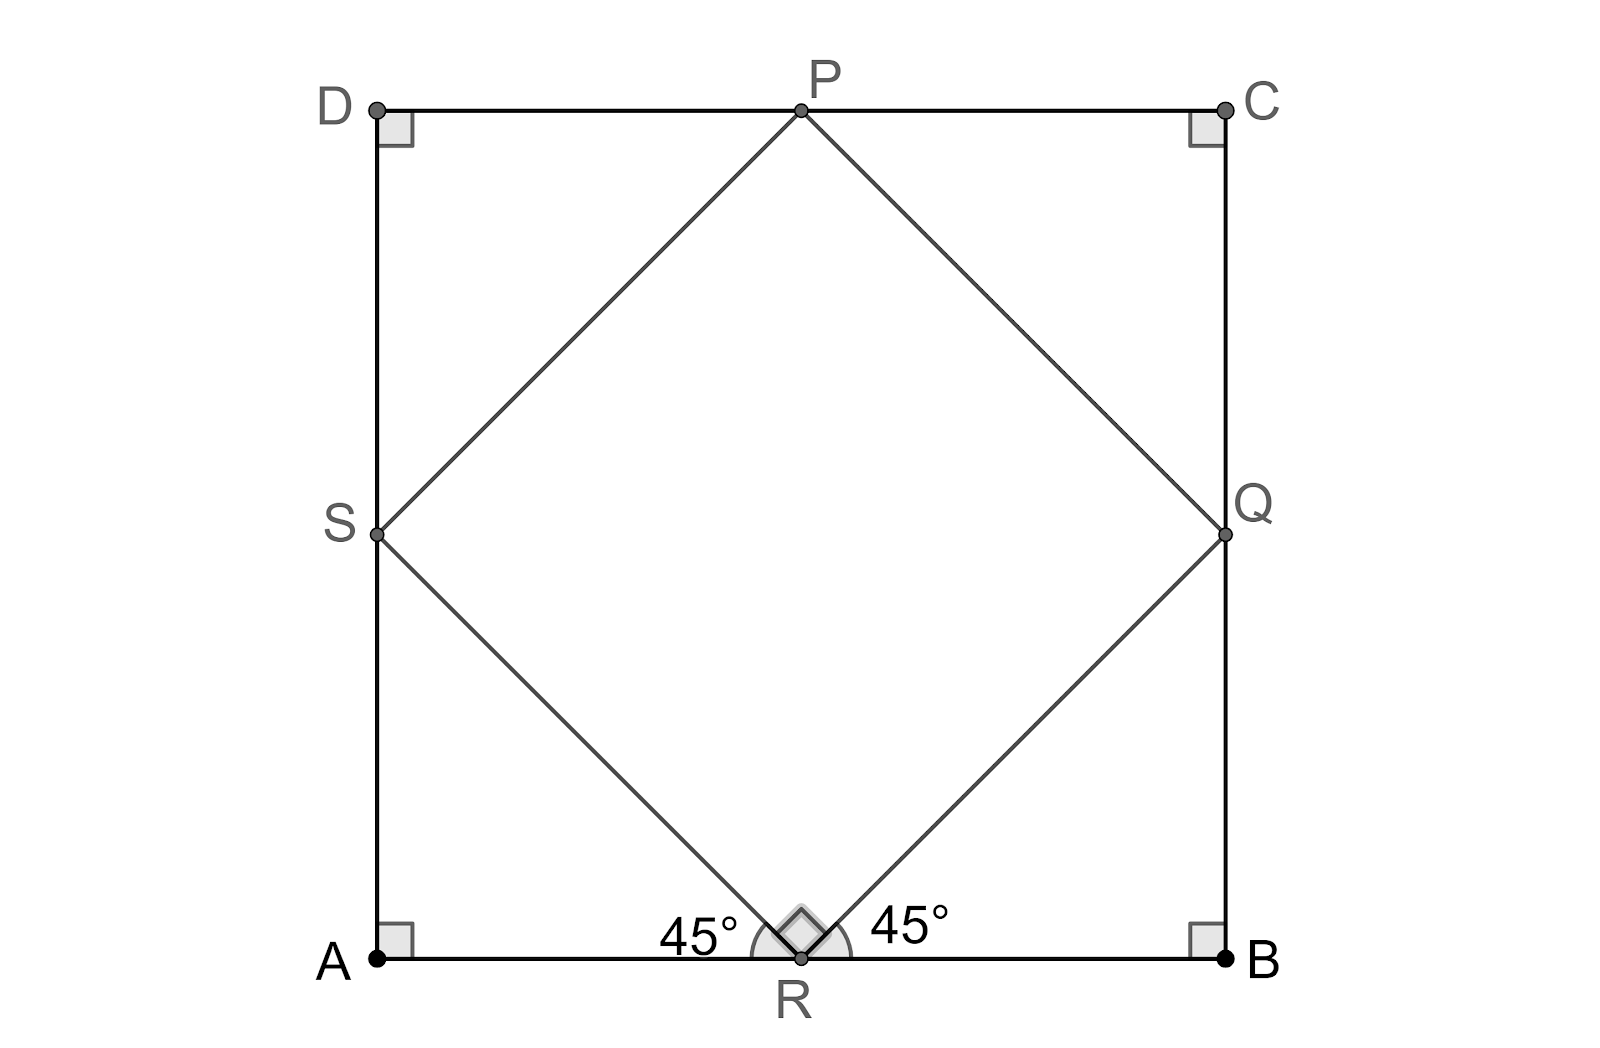 Show That The Quadrilateral Formed By Joining The Mid Points Of The Sides Of A Square Is Also 7883